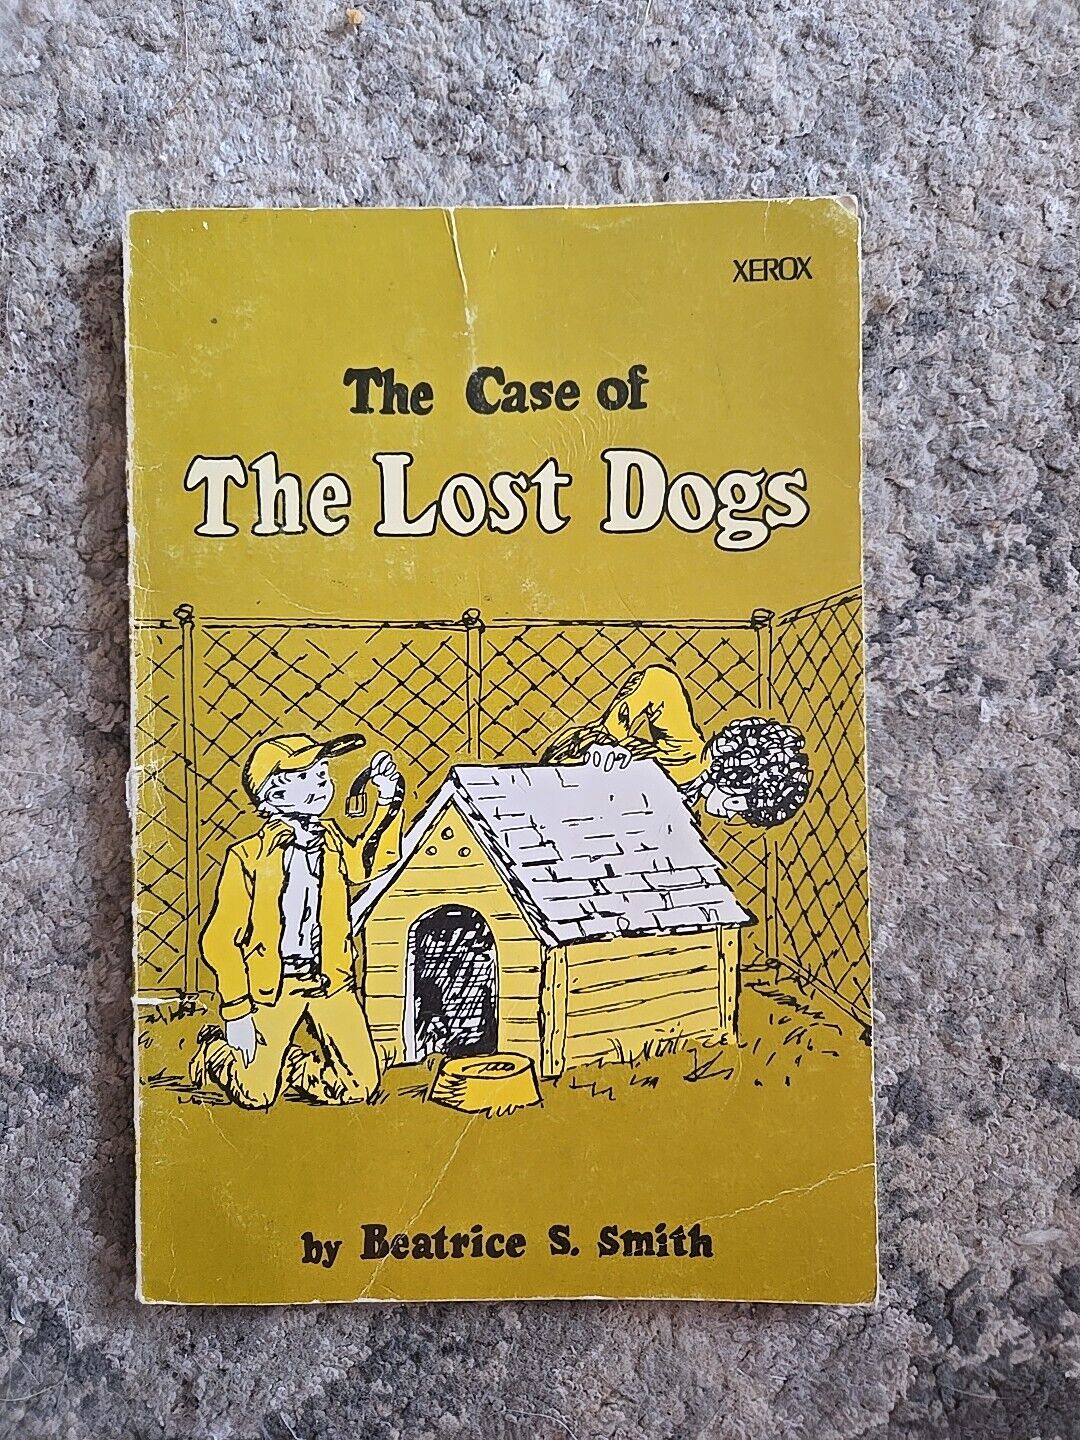 VINTAGE 1976 THE CASE OF THE LOST DOGS BEATRICE S. SMITH 1ST EDITION PB XEROX